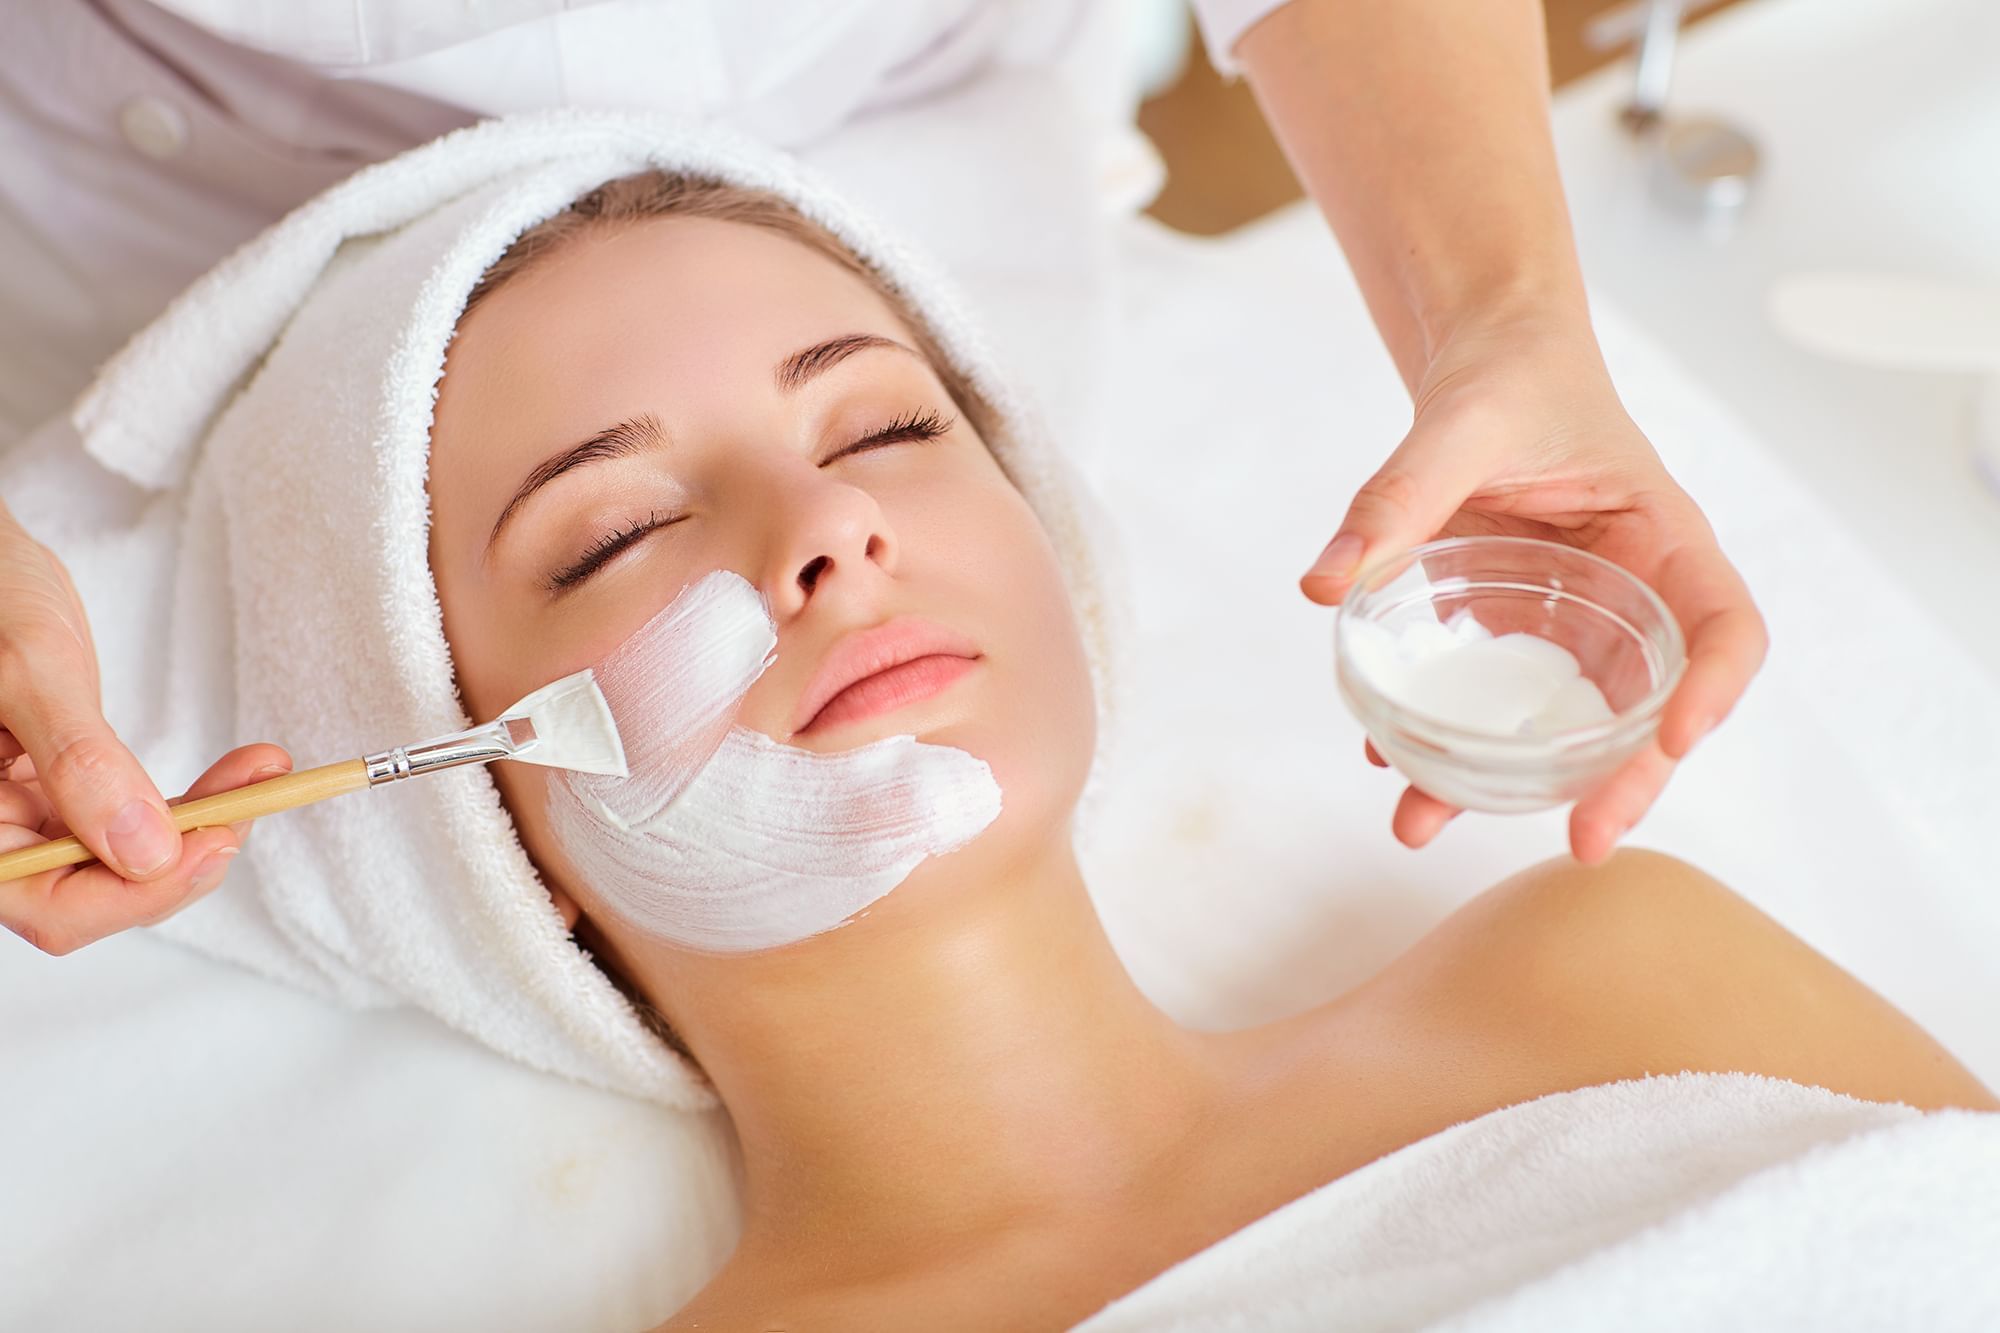 Le Spa face treatments at The Spa by Warwick Melrose